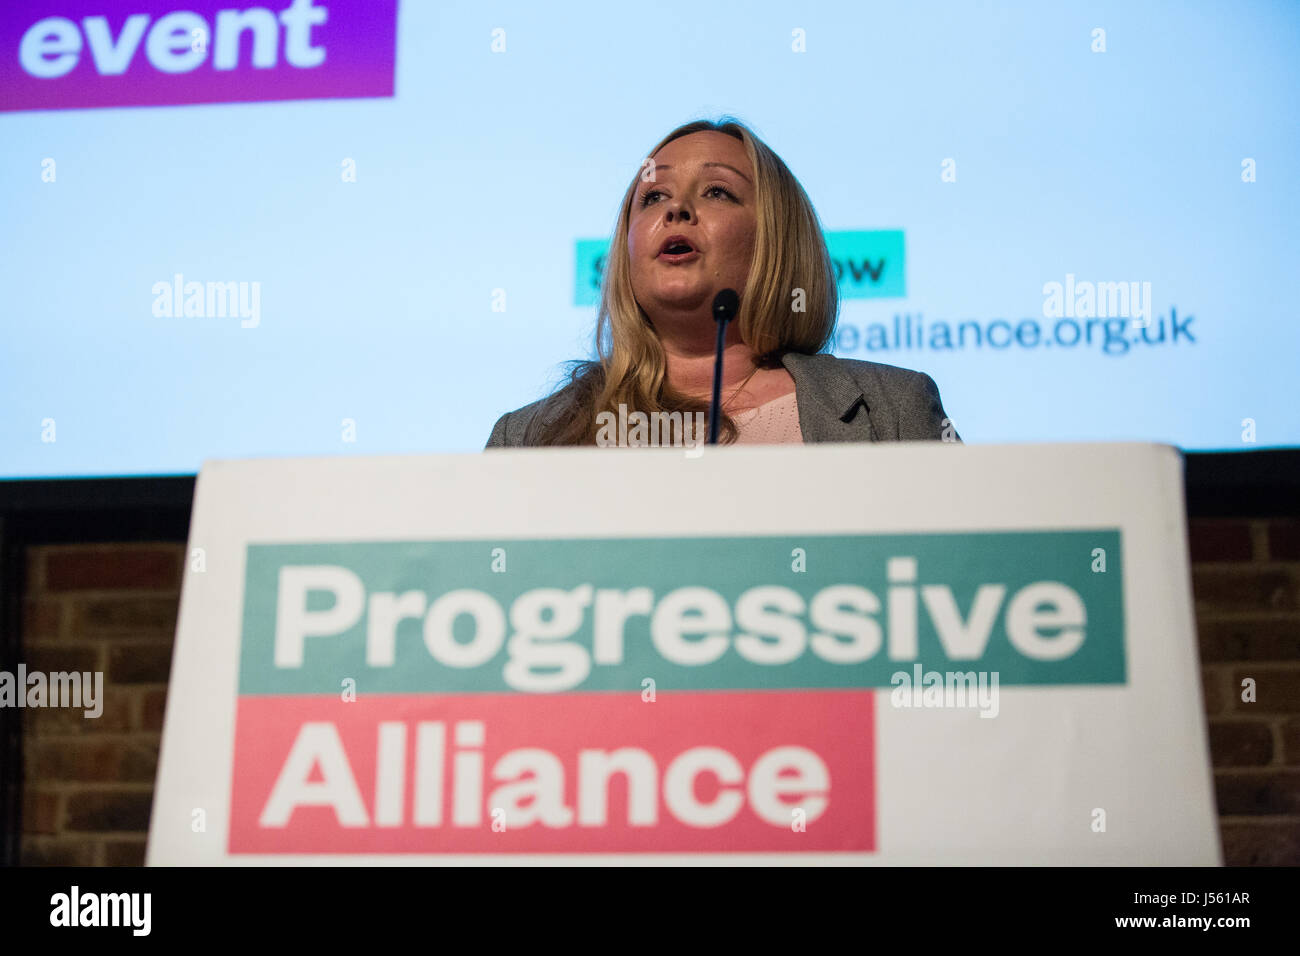 London, UK. 15th May, 2017. Naomi Smith, Chair of the Social Liberal Forum, addresses the 'Building A Progressive Future' launch event for the Progressive Alliance at the Brewery in the City of London. Credit: Mark Kerrison/Alamy Live News Stock Photo